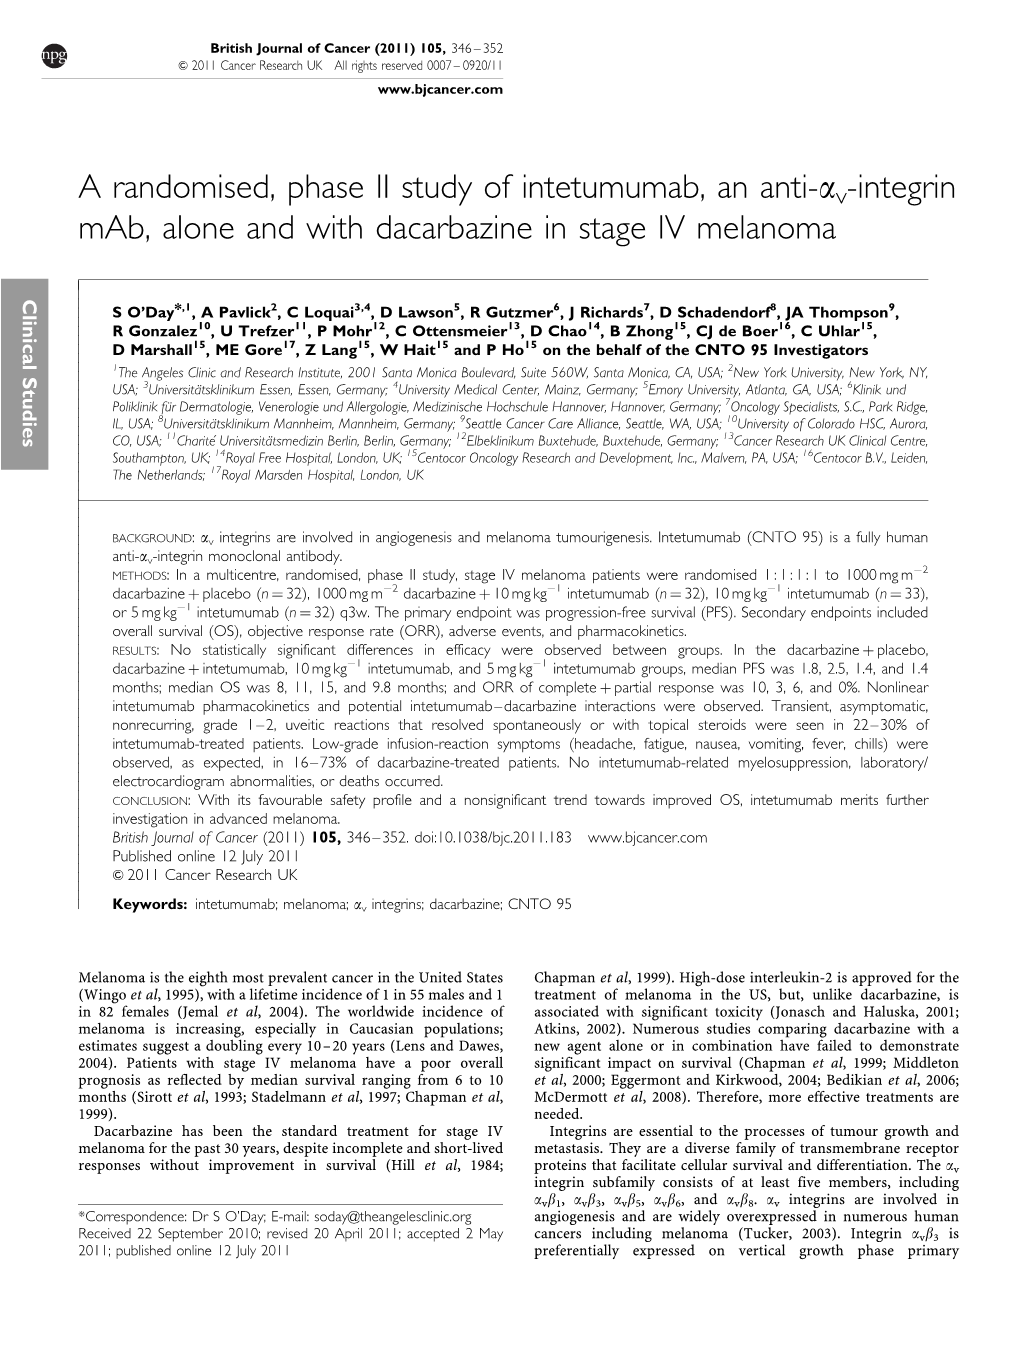 V-Integrin Mab, Alone and with Dacarbazine in Stage IV Melanoma